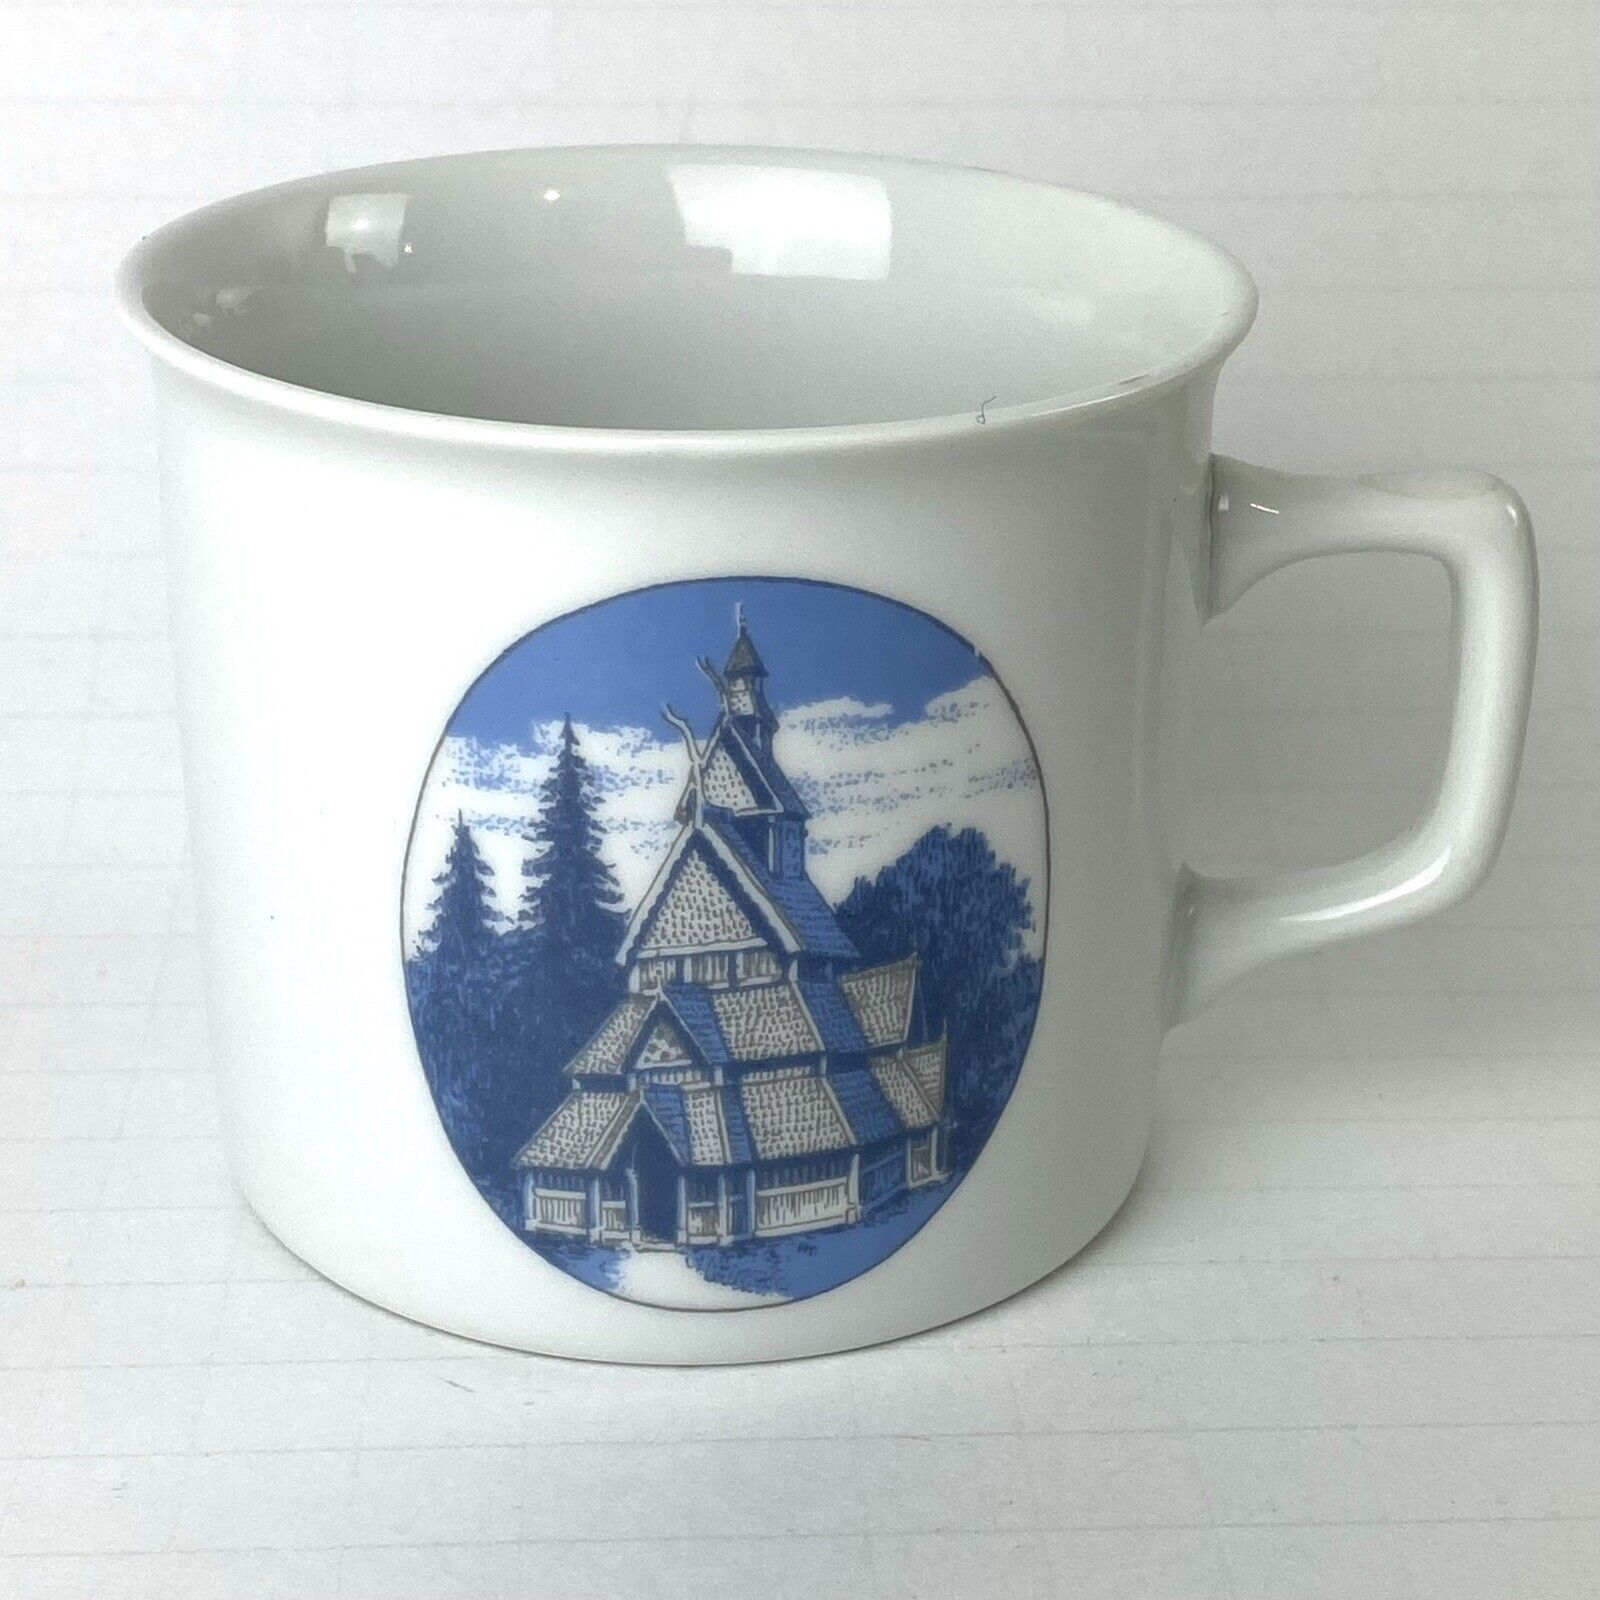 Vintage Porsgrund Norway 74 Coffee Cup with Stave Church White Blue Gray